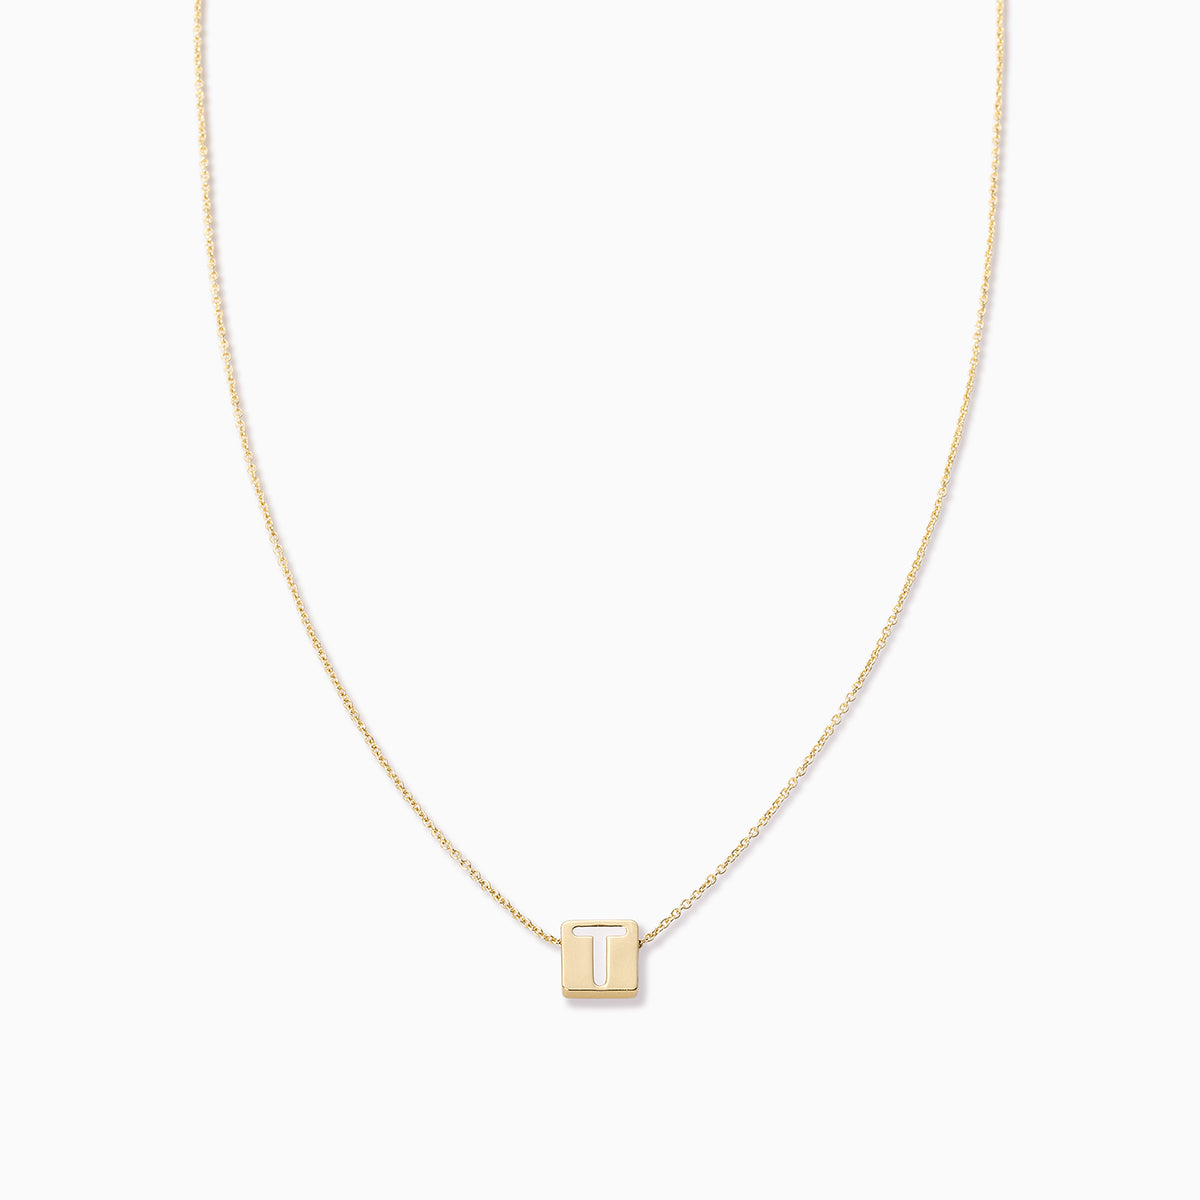 Lucky Number Charm Necklace 14k Gold - Kinn